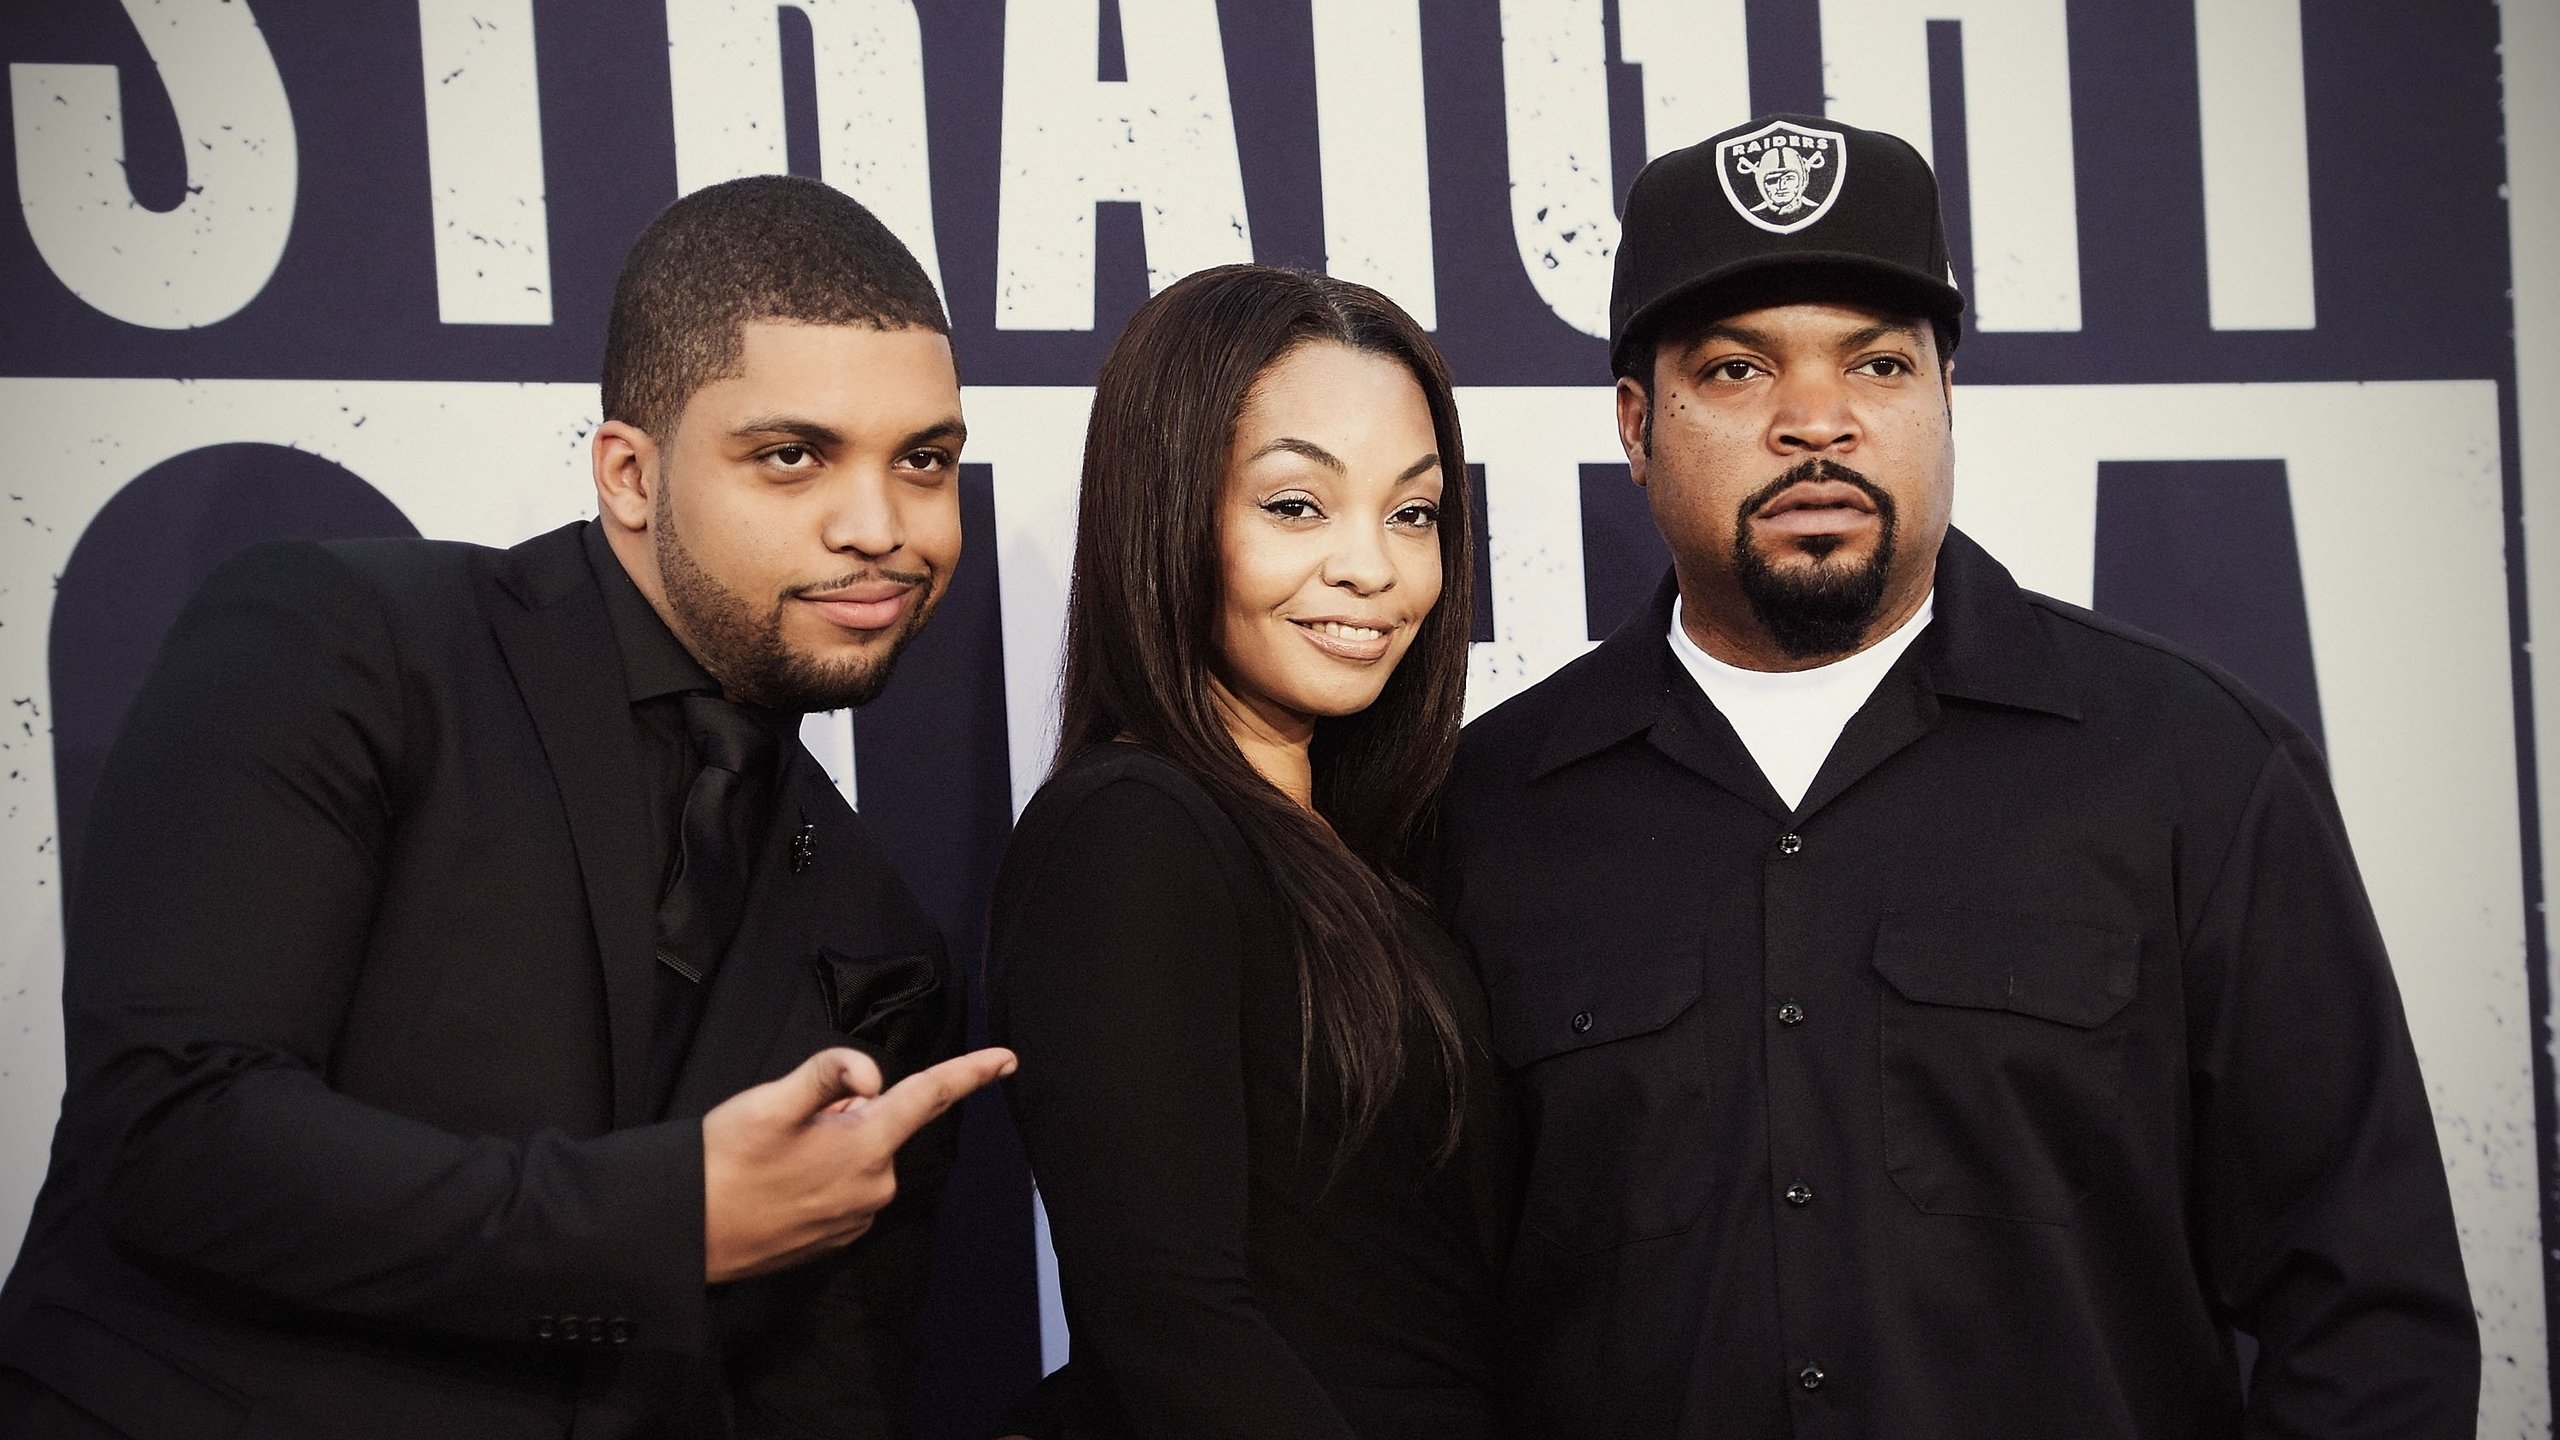 Straight Outta Compton O'Shea Jackson and Ice Cube for 2560x1440 HDTV resolution